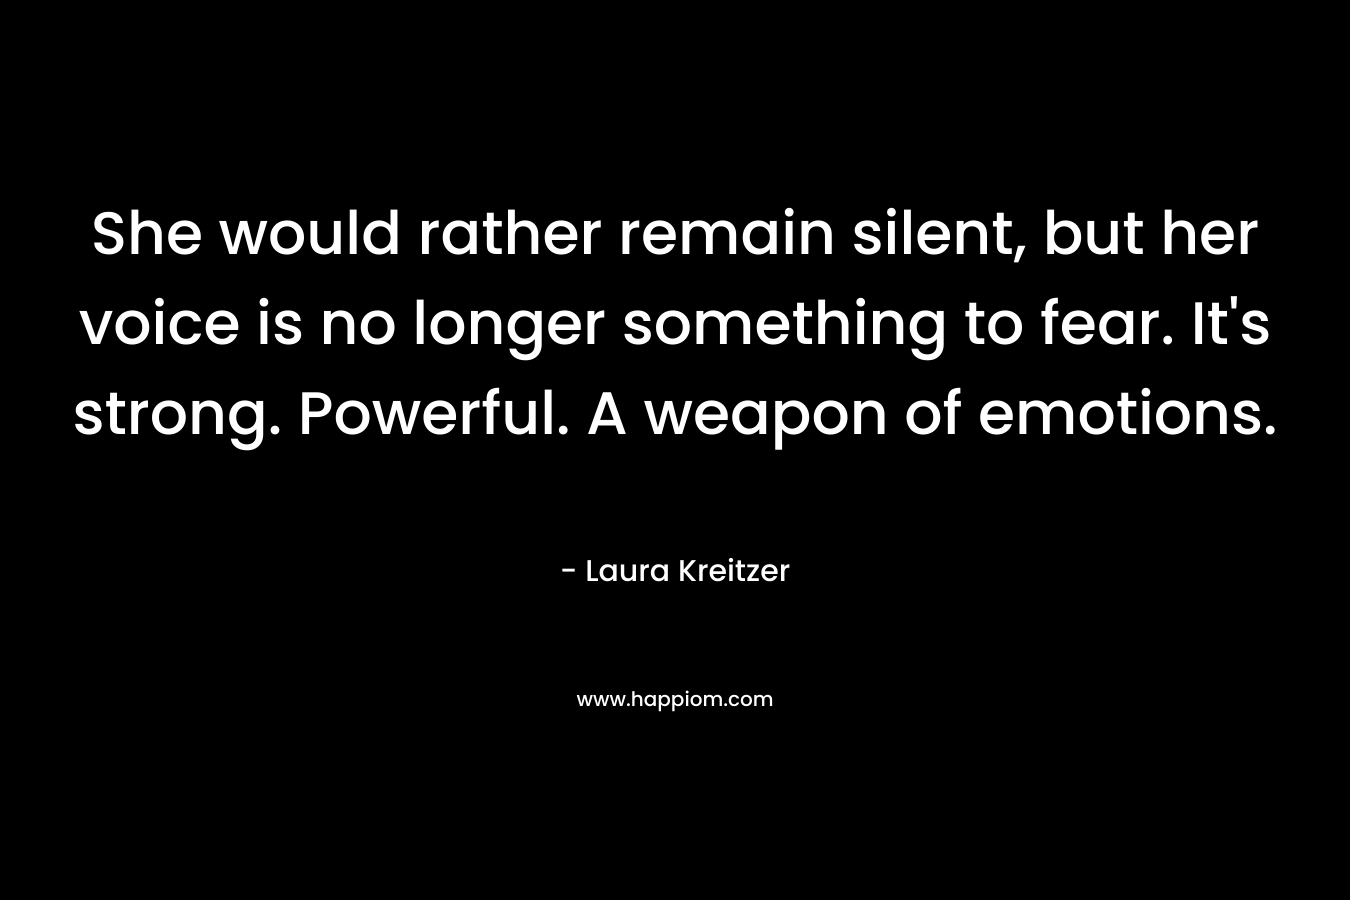 She would rather remain silent, but her voice is no longer something to fear. It’s strong. Powerful. A weapon of emotions. – Laura Kreitzer